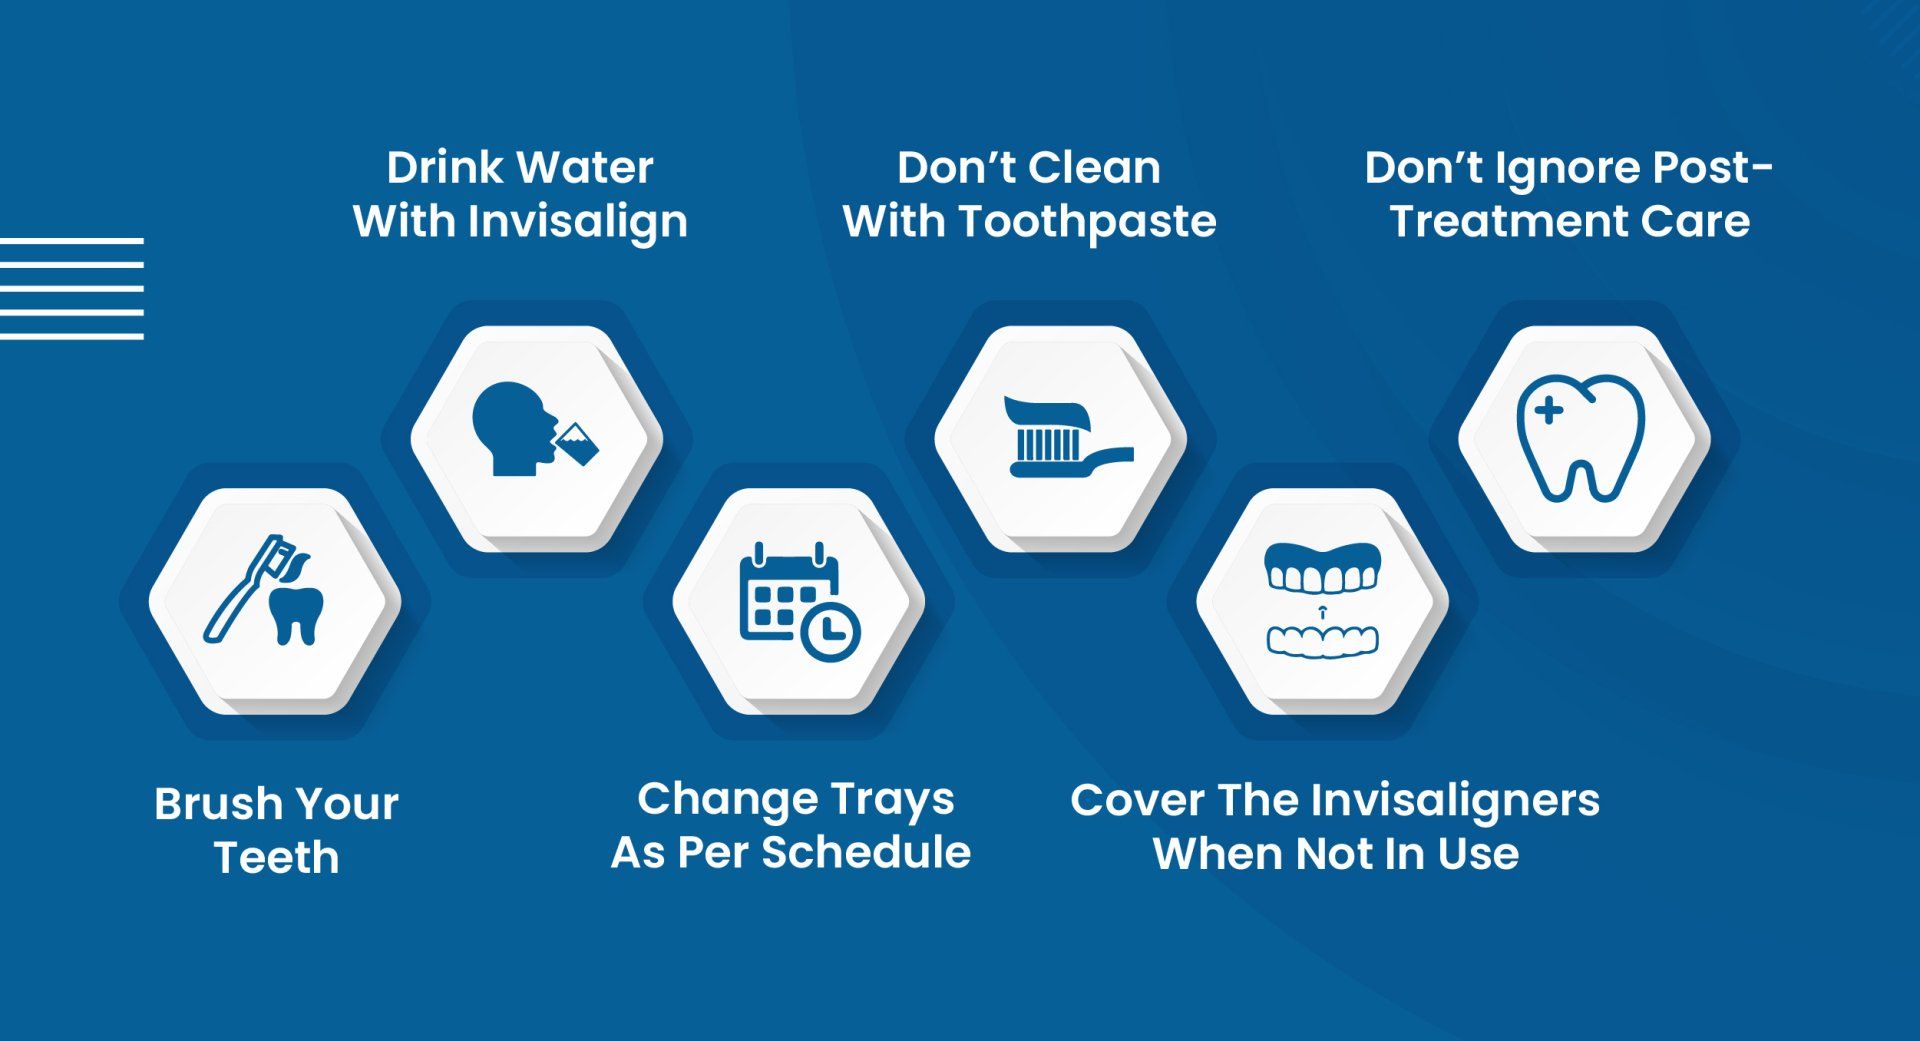 Tips for the New Invisalign Users